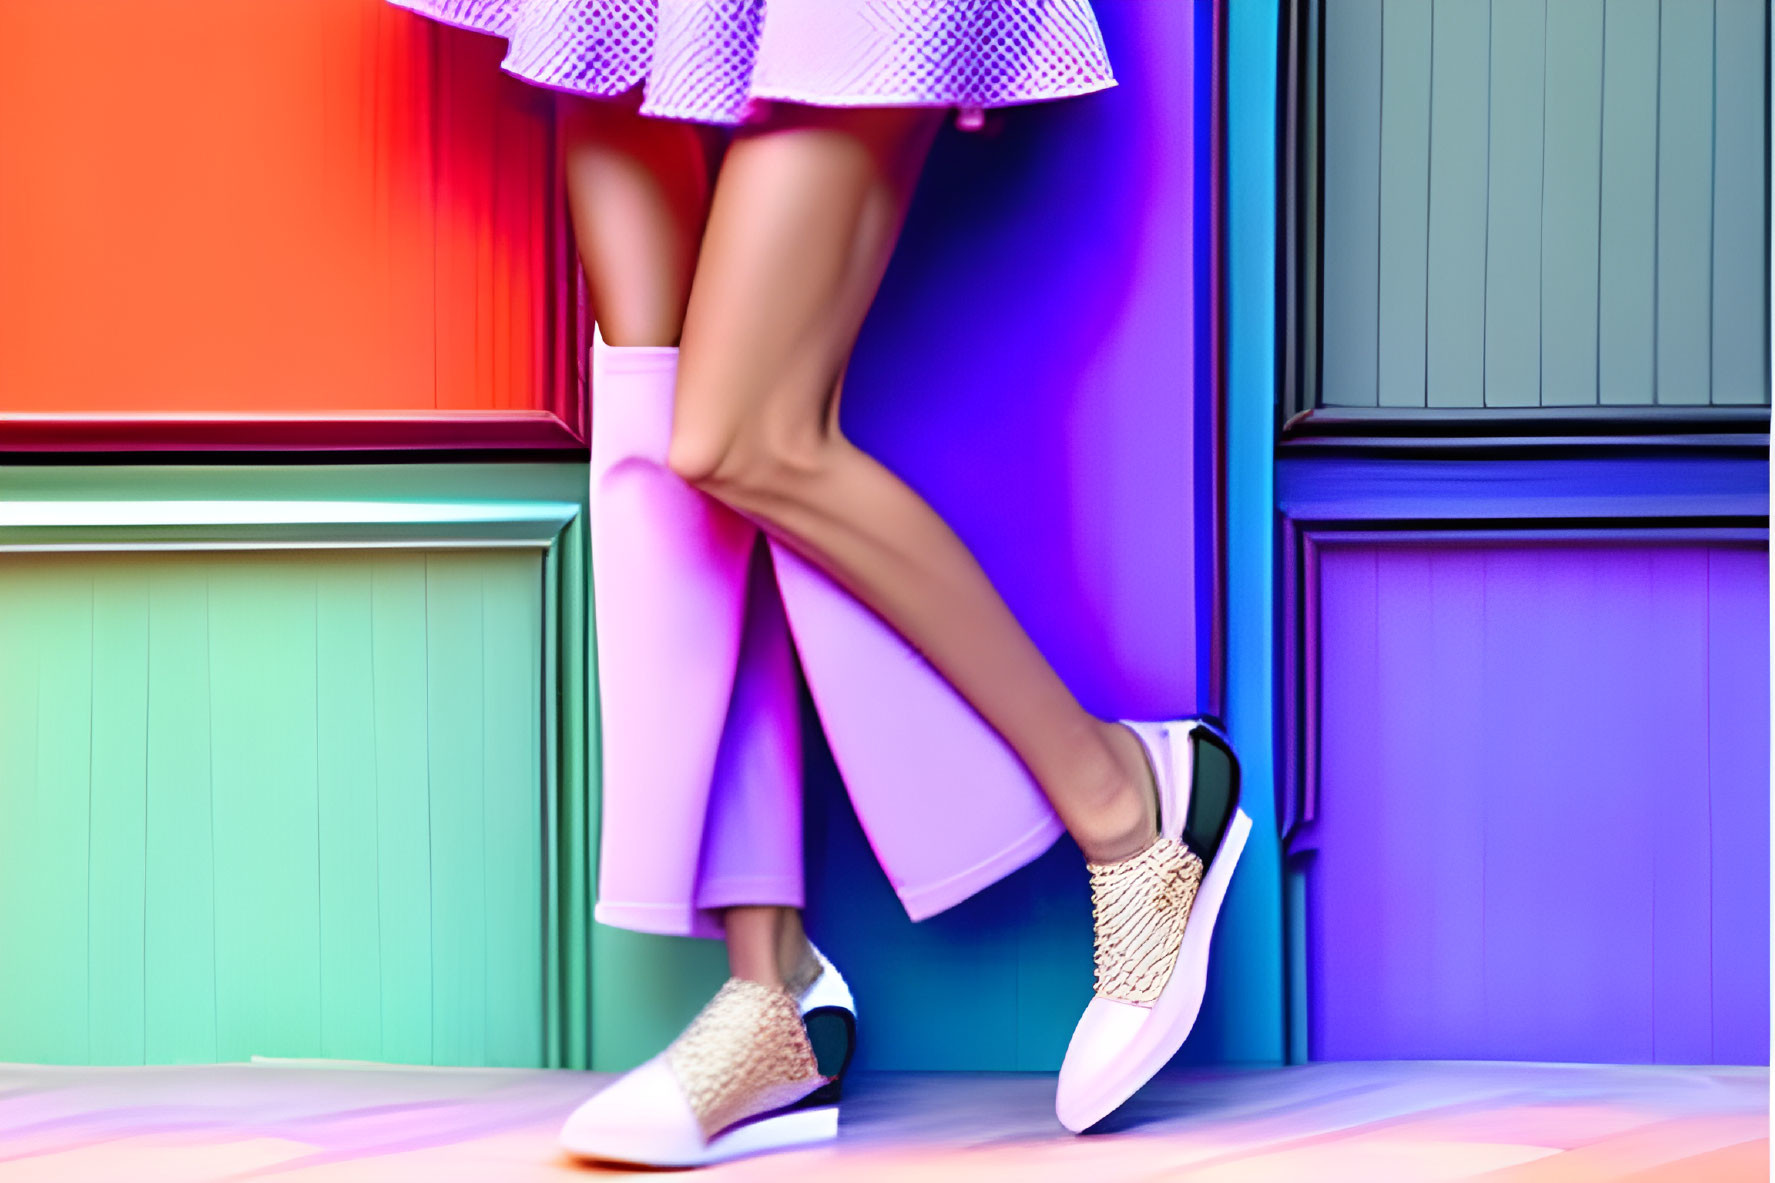 Person in Pink Knee-High Socks and White Sneakers by Colorful Wall